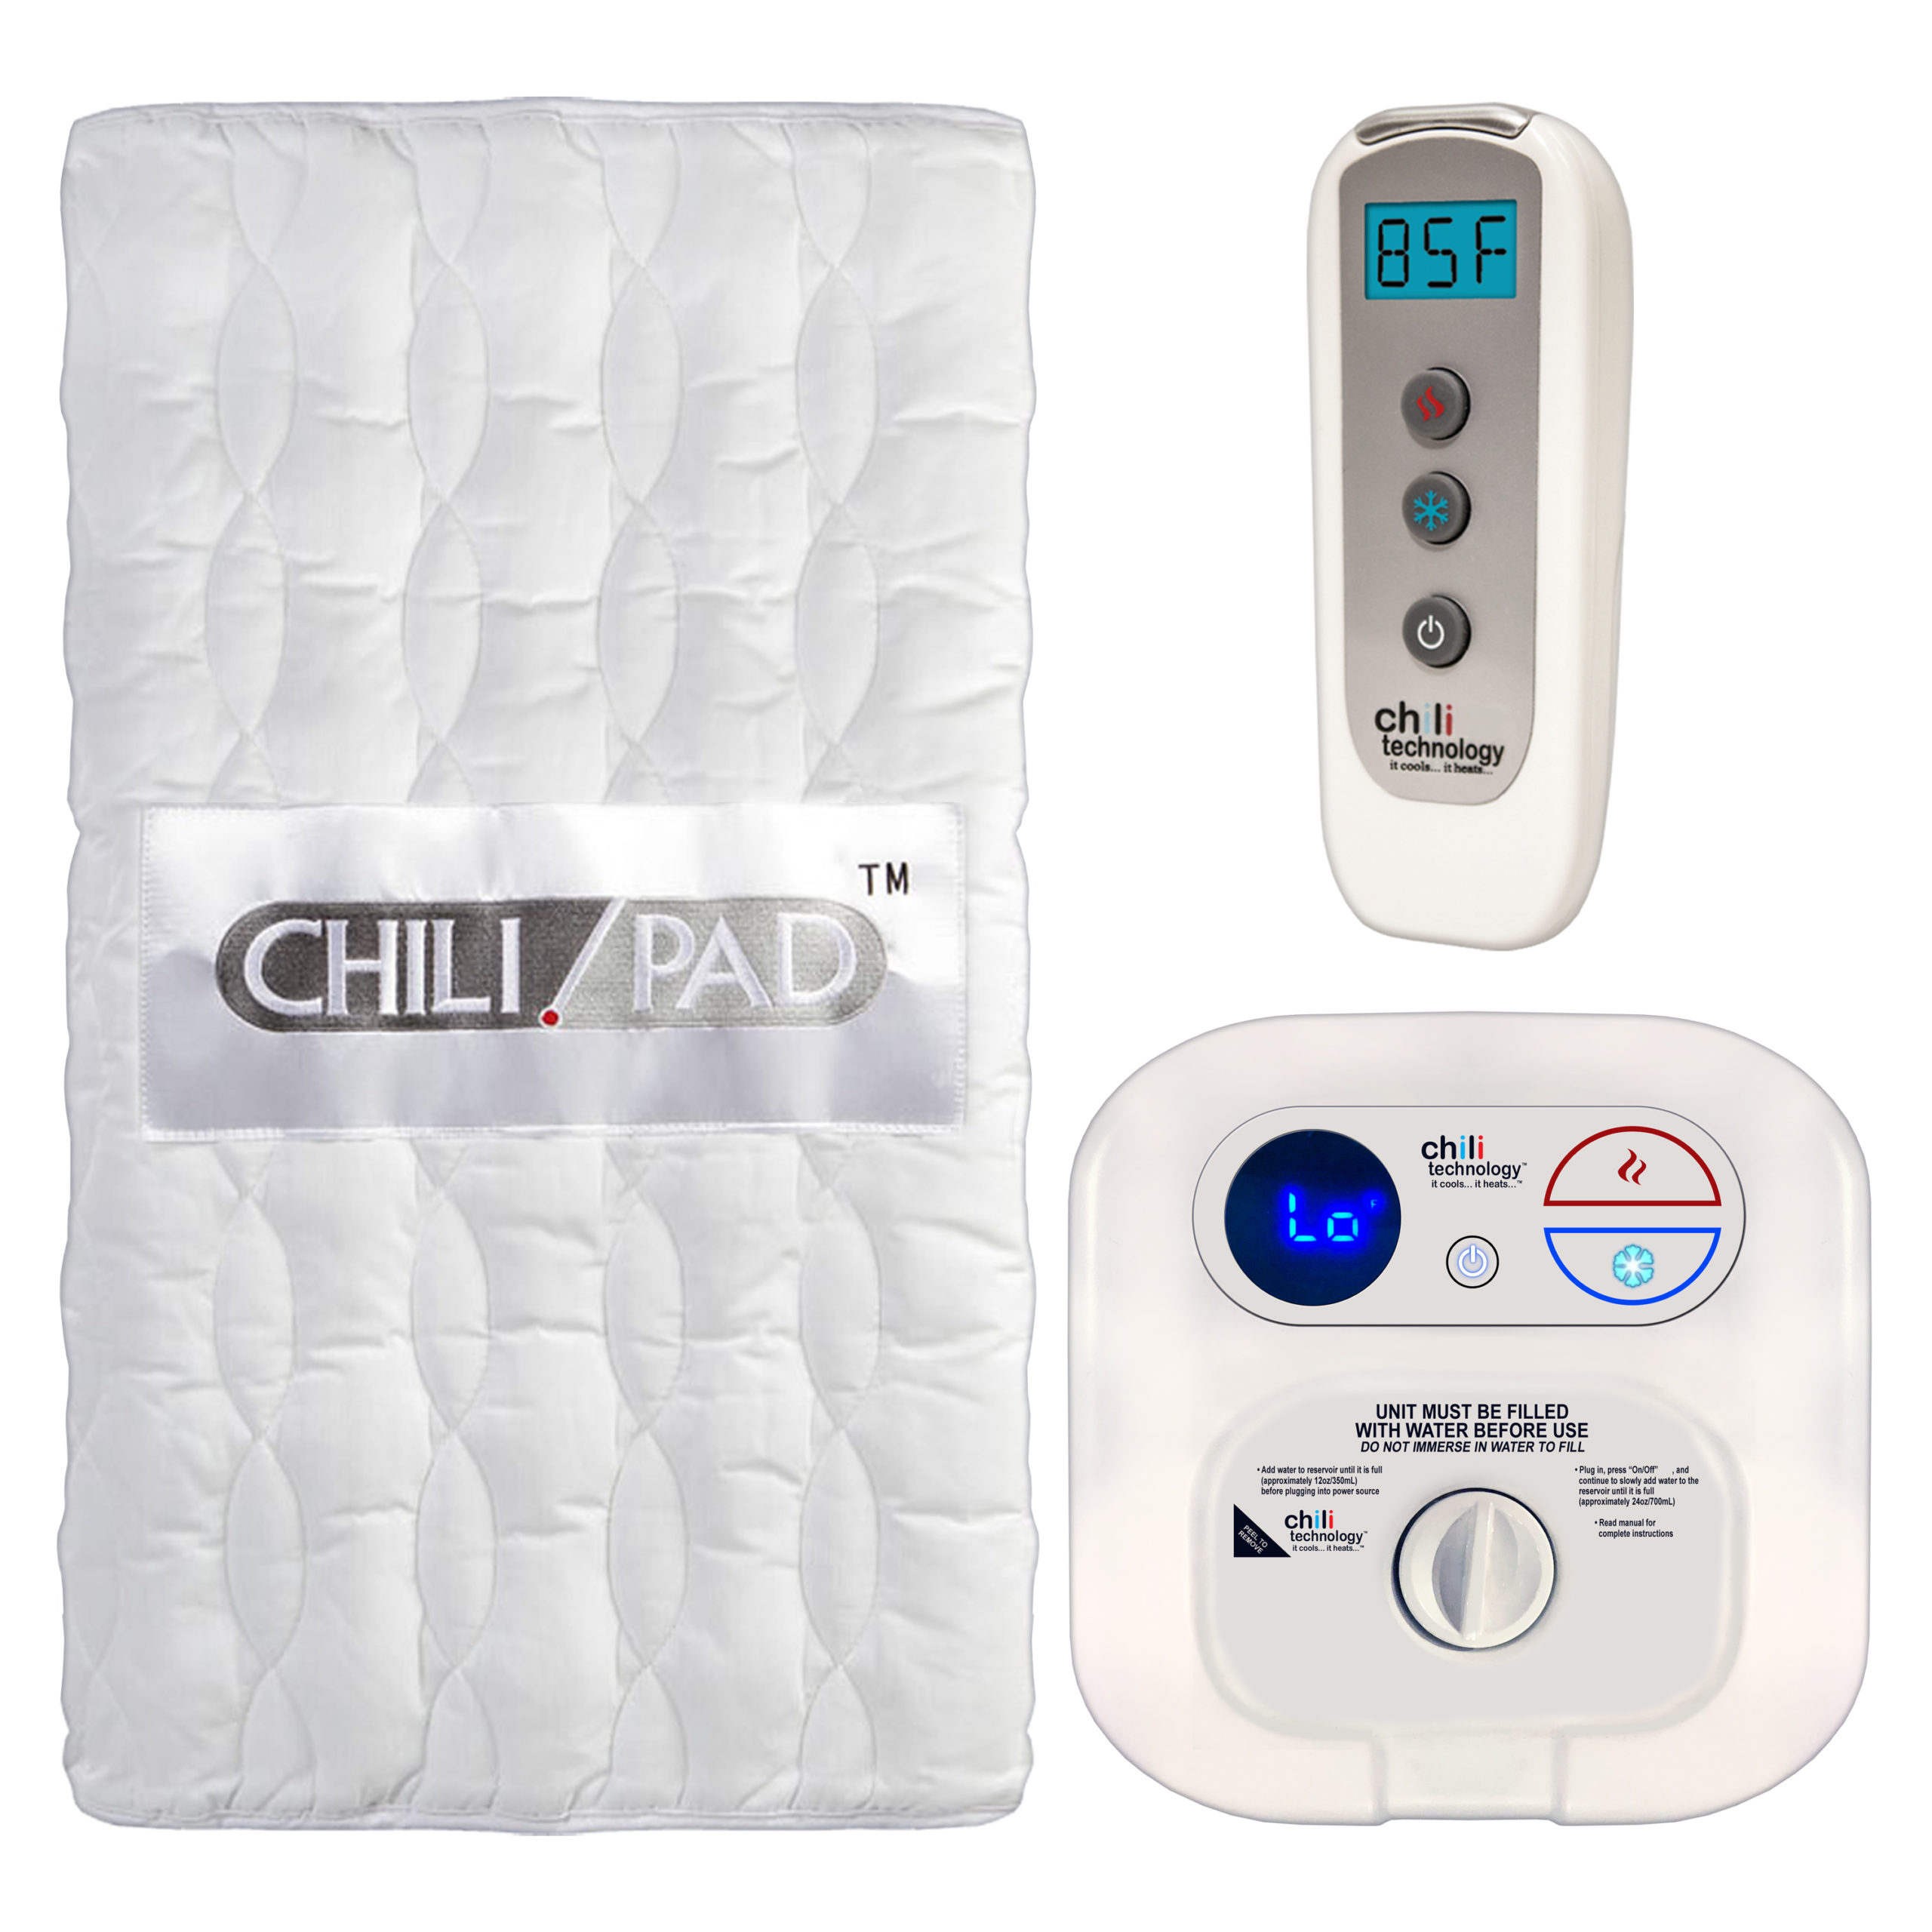 Whats the Best Mattress for Me - Chilipad|Temperature|Mattress|Cube|Sleep|Bed|Water|System|Pad|Ooler|Control|Unit|Night|Bedjet|Technology|Side|Air|Product|Review|Body|Time|Degrees|Noise|Price|Pod|Tubes|Heat|Device|Cooling|Room|King|App|Features|Size|Cover|Sleepers|Sheets|Energy|Warranty|Quality|Mattress Pad|Control Unit|Cube Sleep System|Sleep Pod|Distilled Water|Remote Control|Sleep System|Desired Temperature|Water Tank|Chilipad Cube|Chili Technology|Deep Sleep|Pro Cover|Ooler Sleep System|Hydrogen Peroxide|Cool Mesh|Sleep Temperature|Fitted Sheet|Pod Pro|Sleep Quality|Smartphone App|Sleep Systems|Chilipad Sleep System|New Mattress|Sleep Trial|Full Refund|Mattress Topper|Body Heat|Air Flow|Chilipad Review